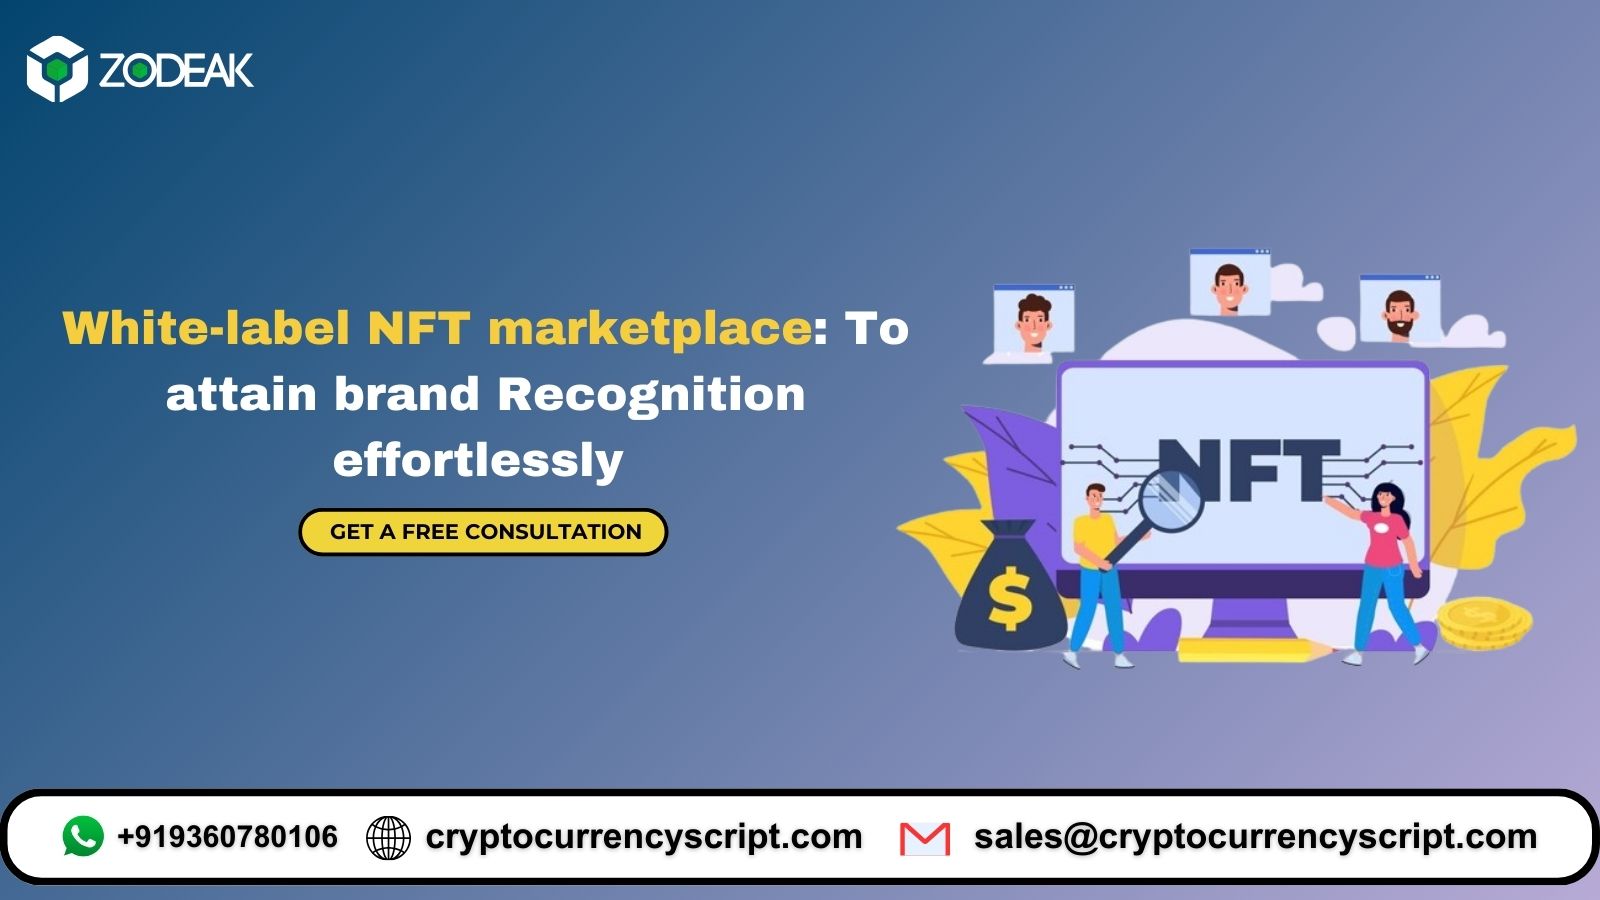 White-label NFT marketplace: To attain brand Recognition effortlessly